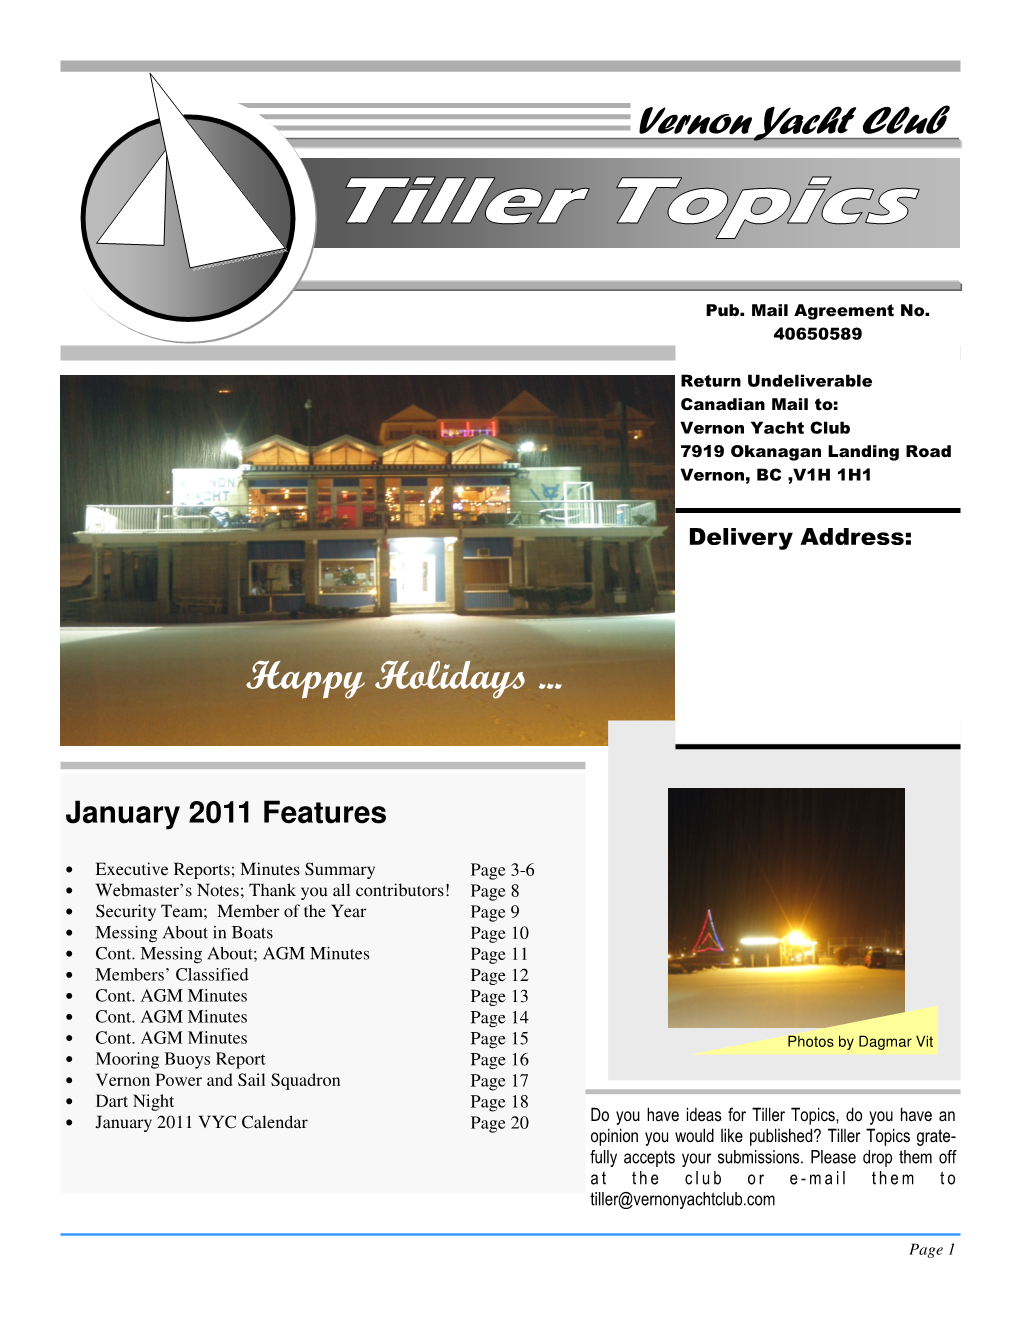 VYC Calendar Page 20 Do You Have Ideas for Tiller Topics, Do You Have an Opinion You Would Like Published? Tiller Topics Grate- Fully Accepts Your Submissions